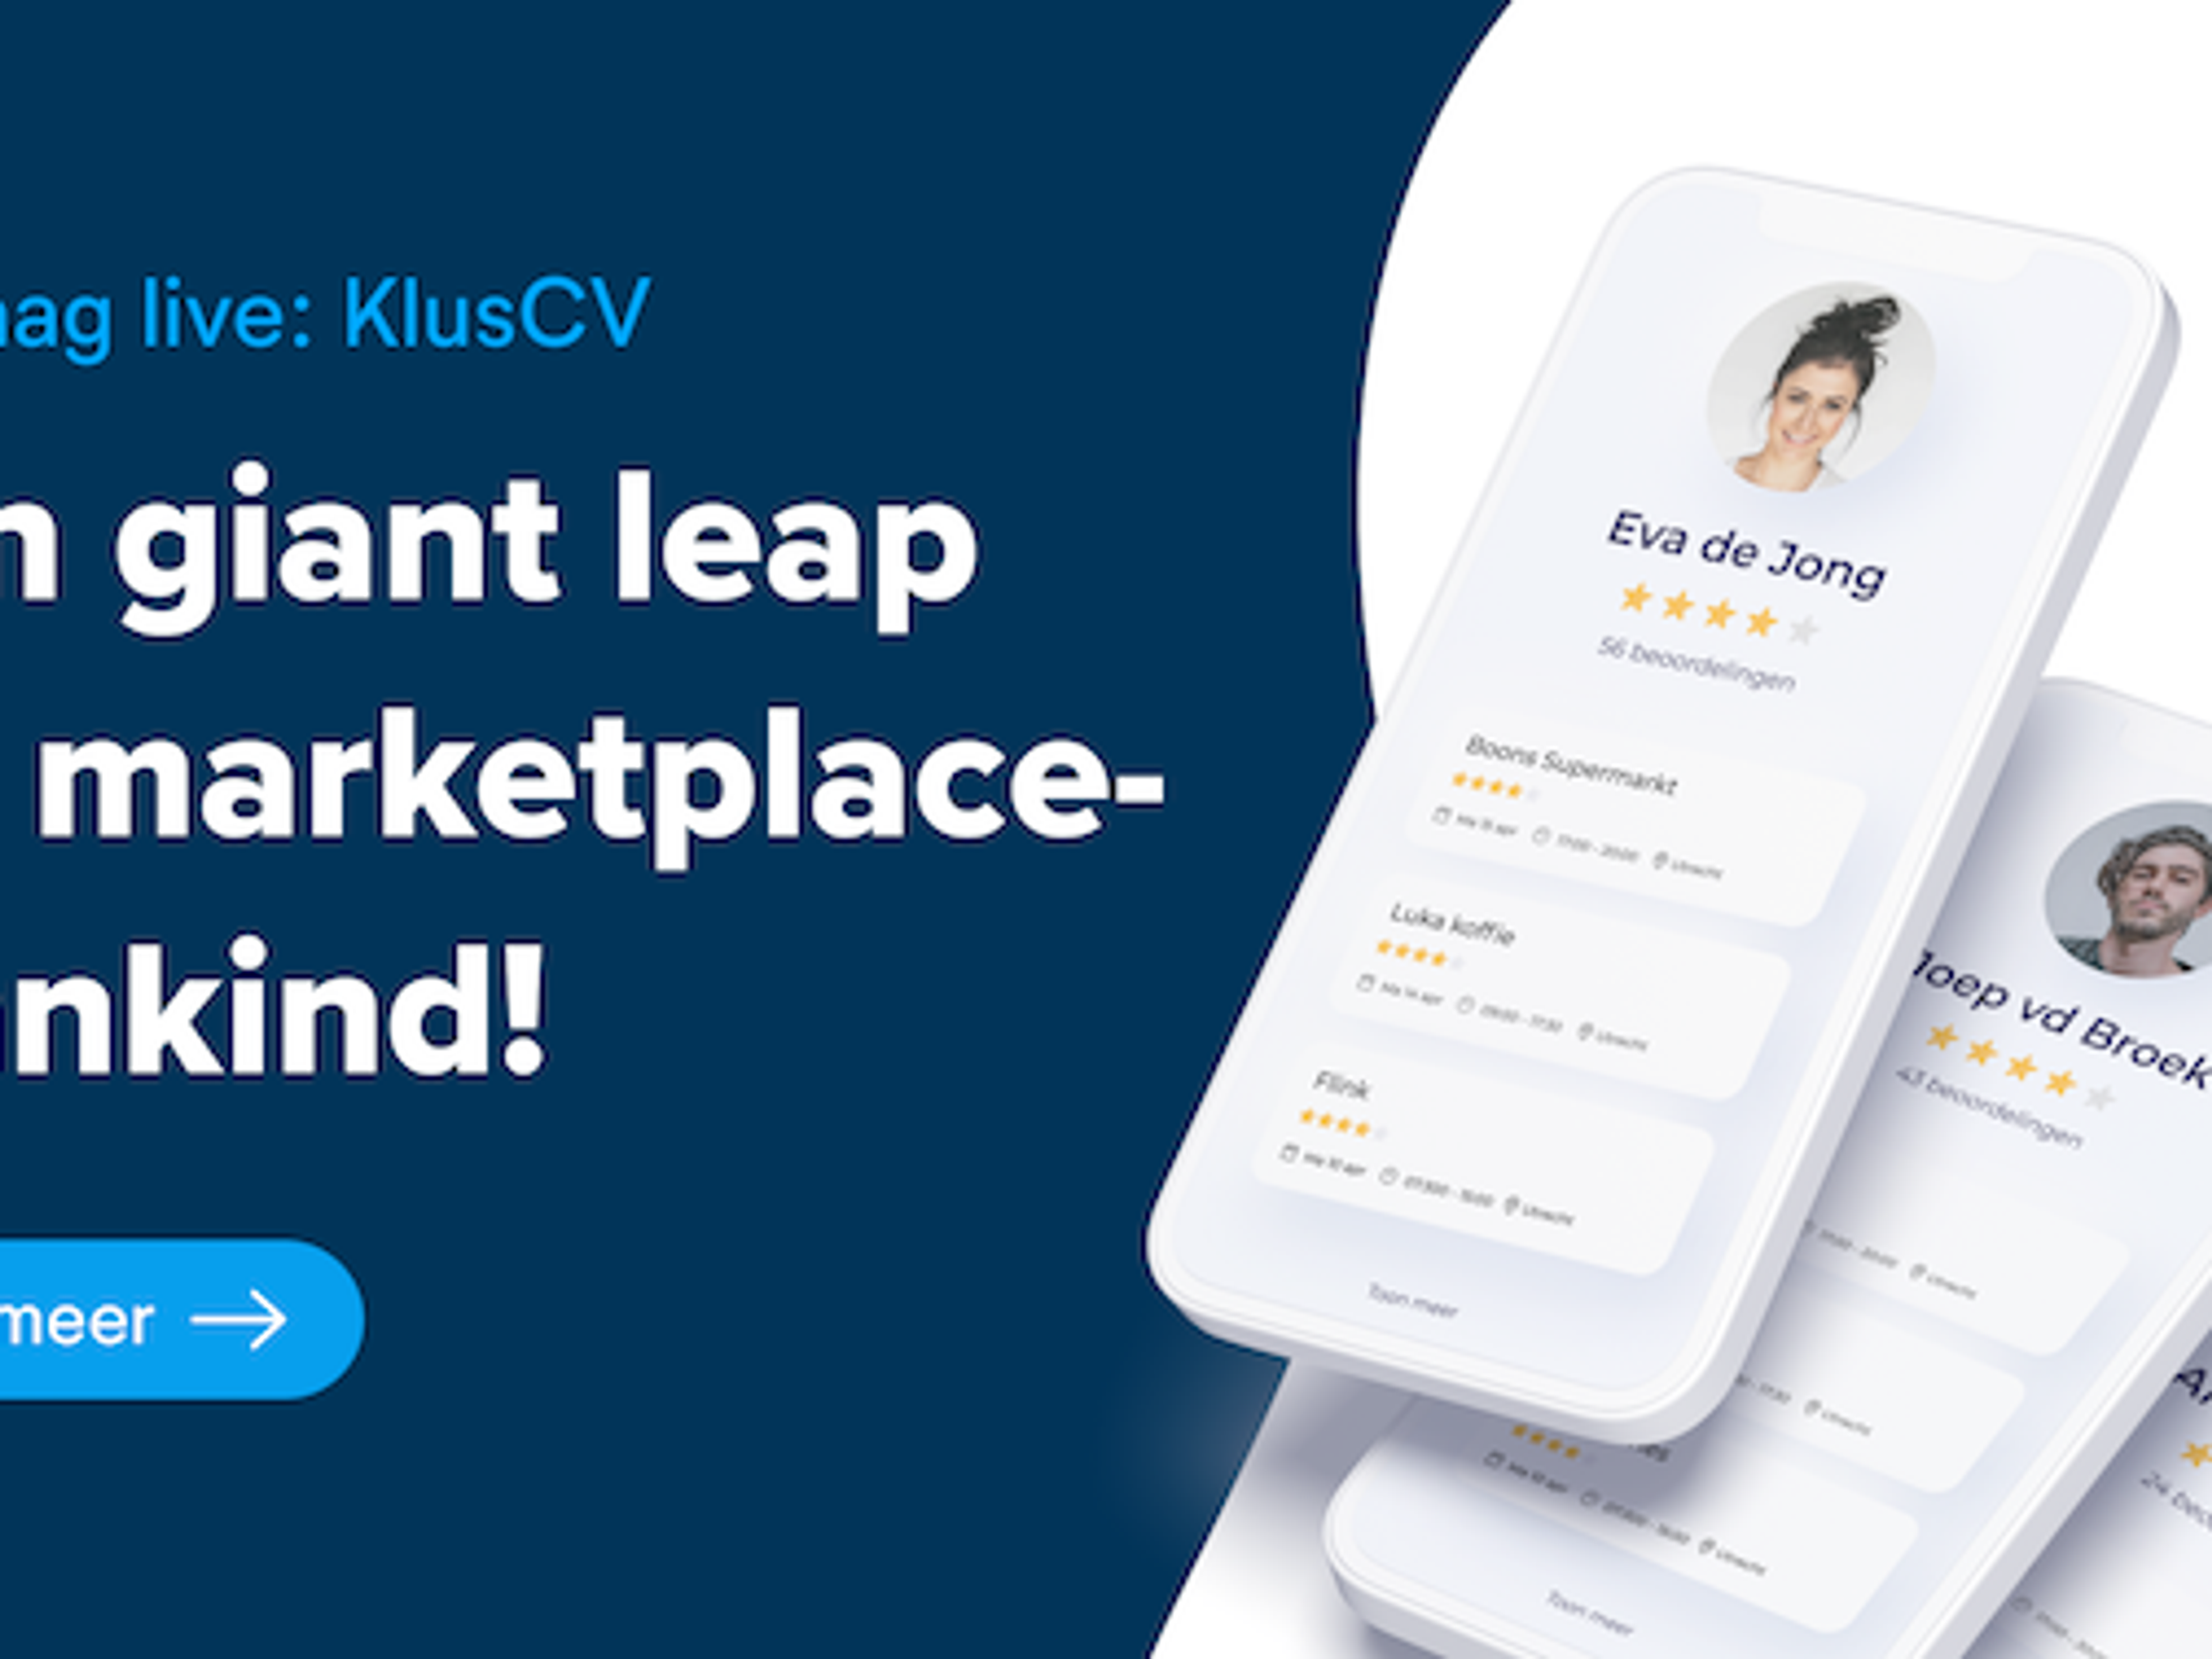 KlusCV: a giant leap for marketplace-mankind!